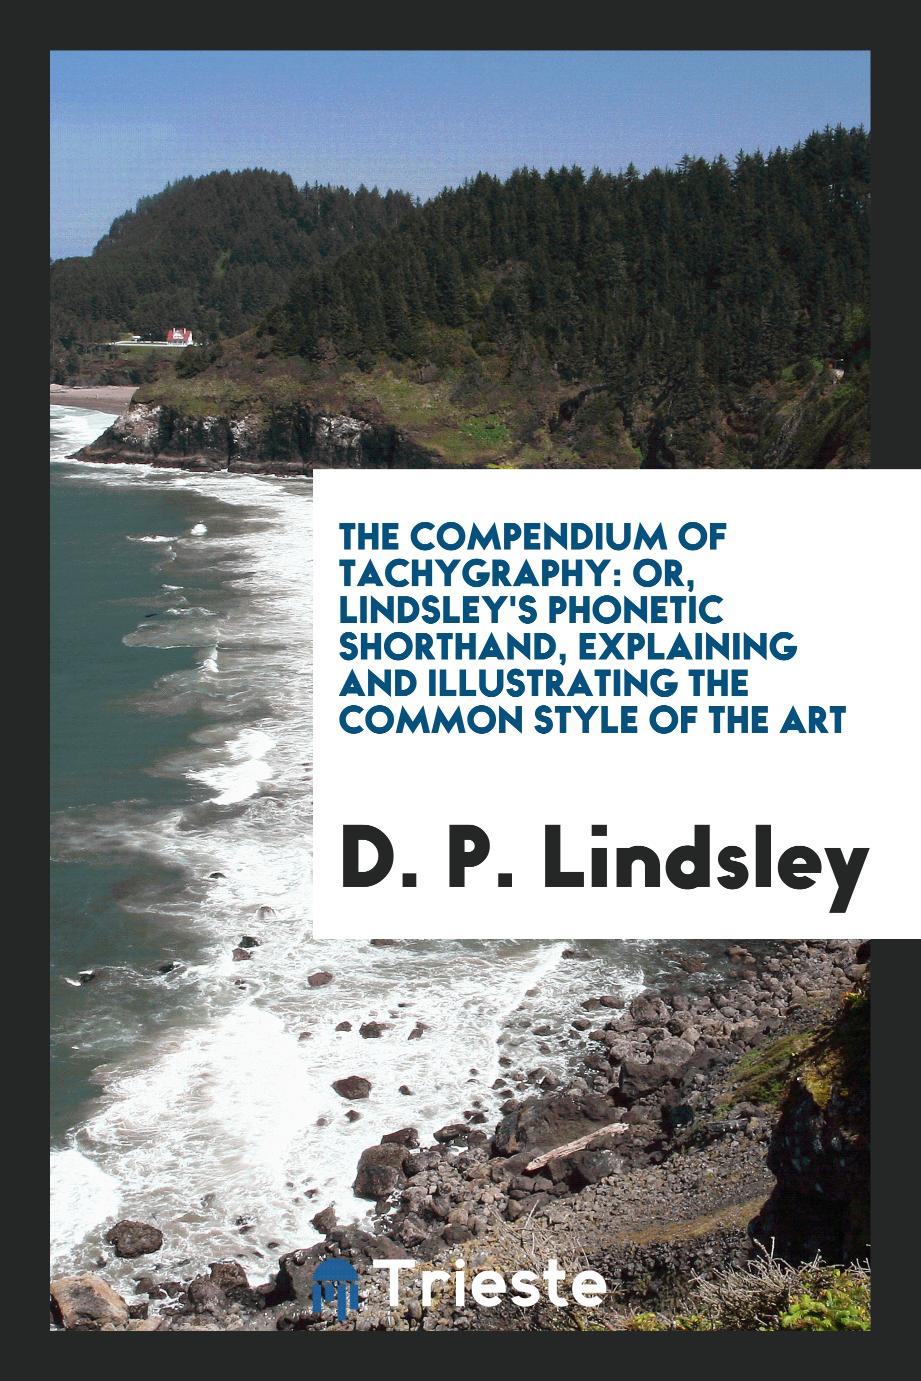 The Compendium of Tachygraphy: Or, Lindsley's Phonetic Shorthand, Explaining and illustrating the common style of the art